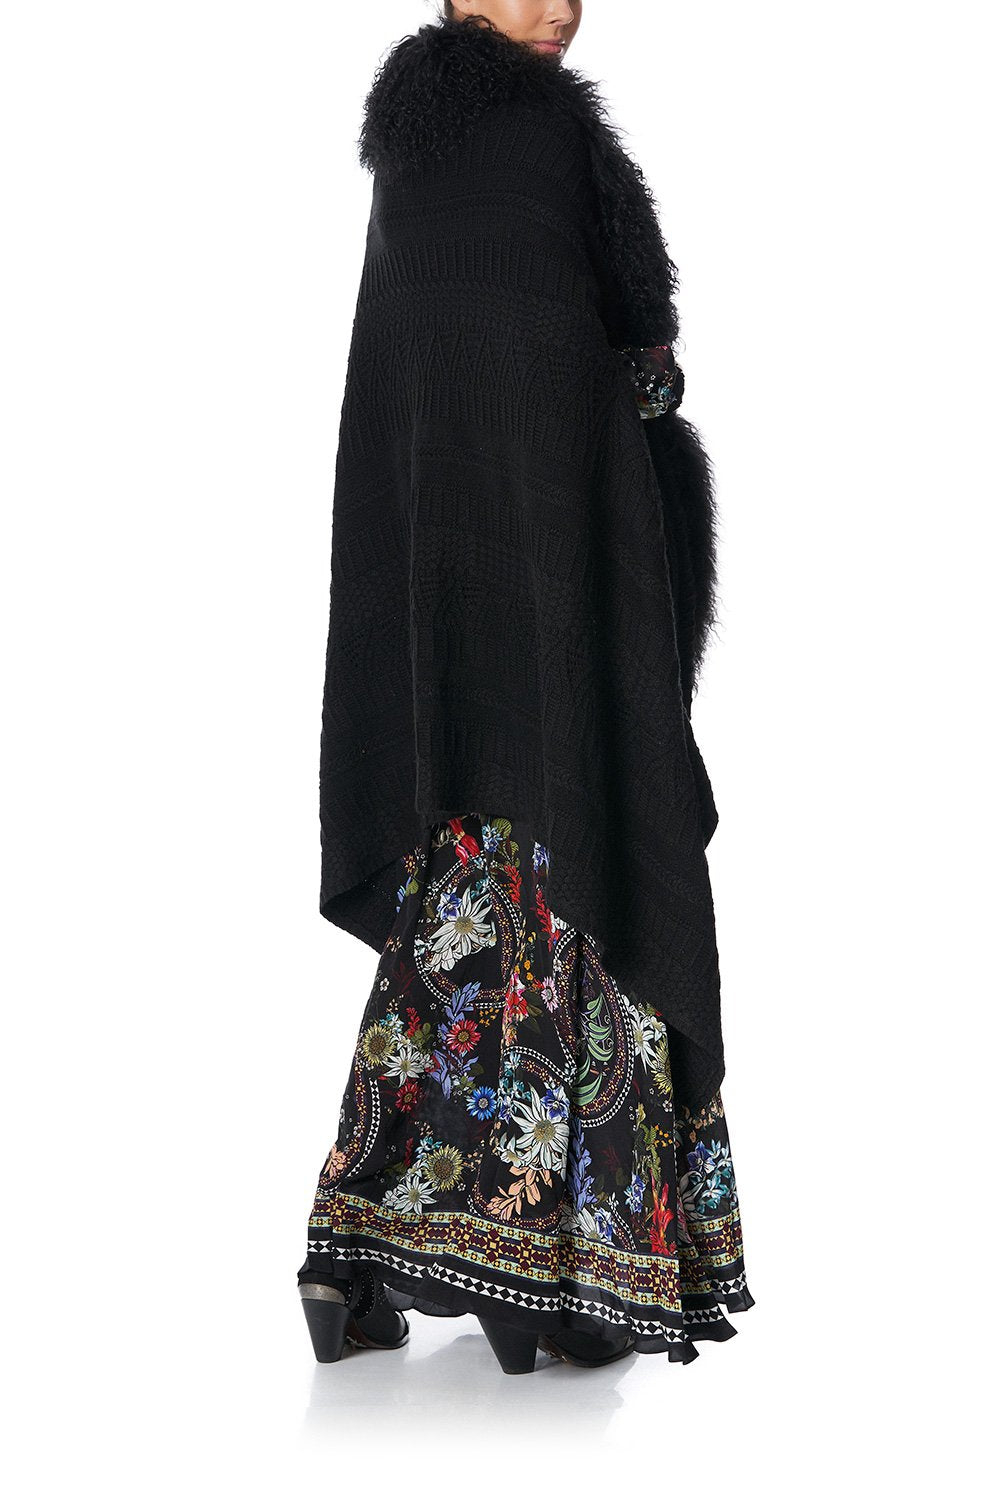 SHEARLING CAPE PAVED IN PAISLEY